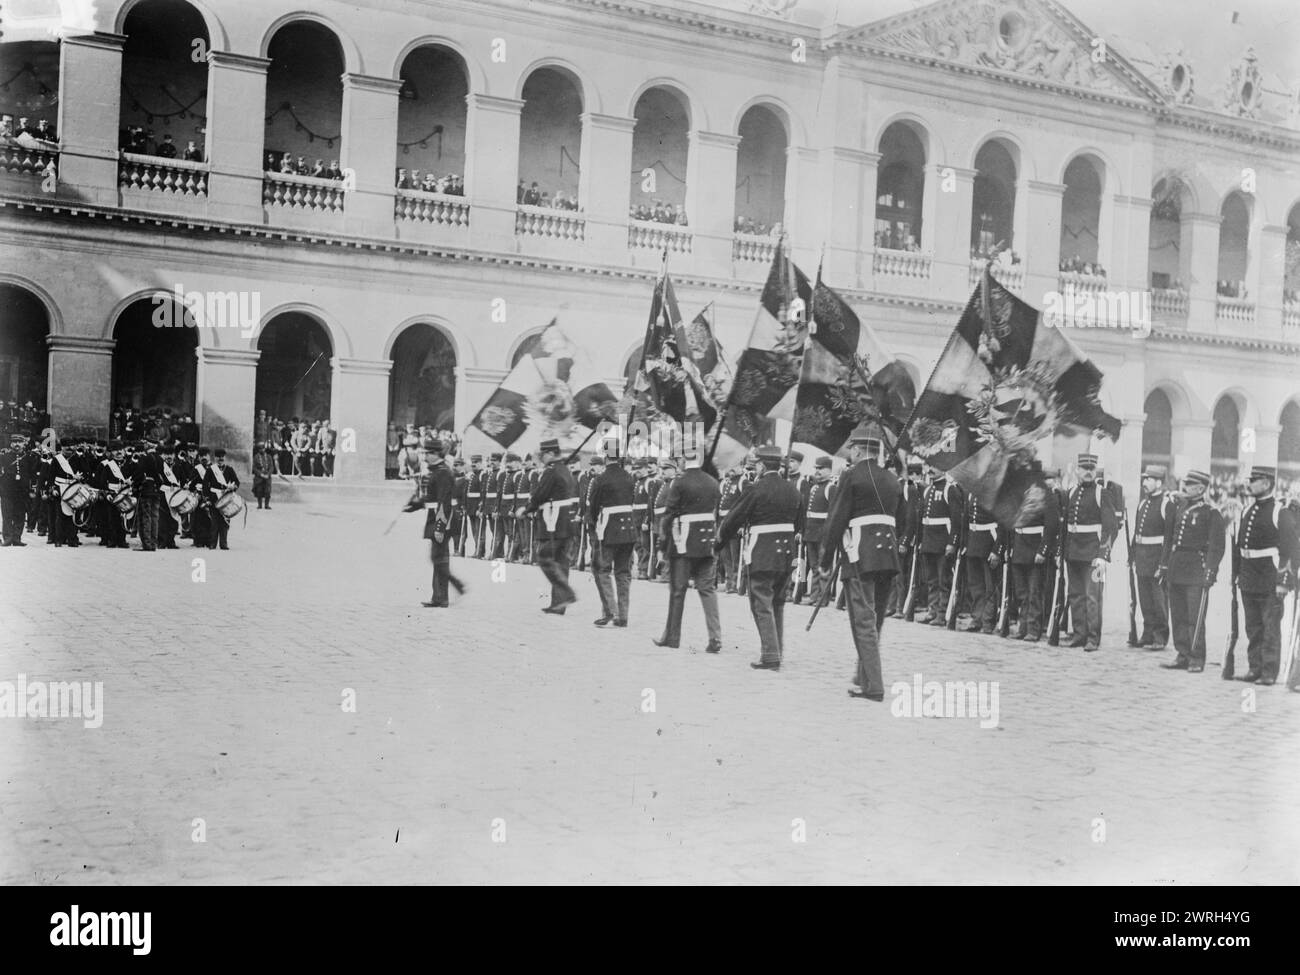 German flags received at Invalides, Paris, 27 Oct 1914 (date created or published later). German flags being paraded by French soldiers at the L'Ho^tel National des Invalides in Paris, France, during World War I. Stock Photo